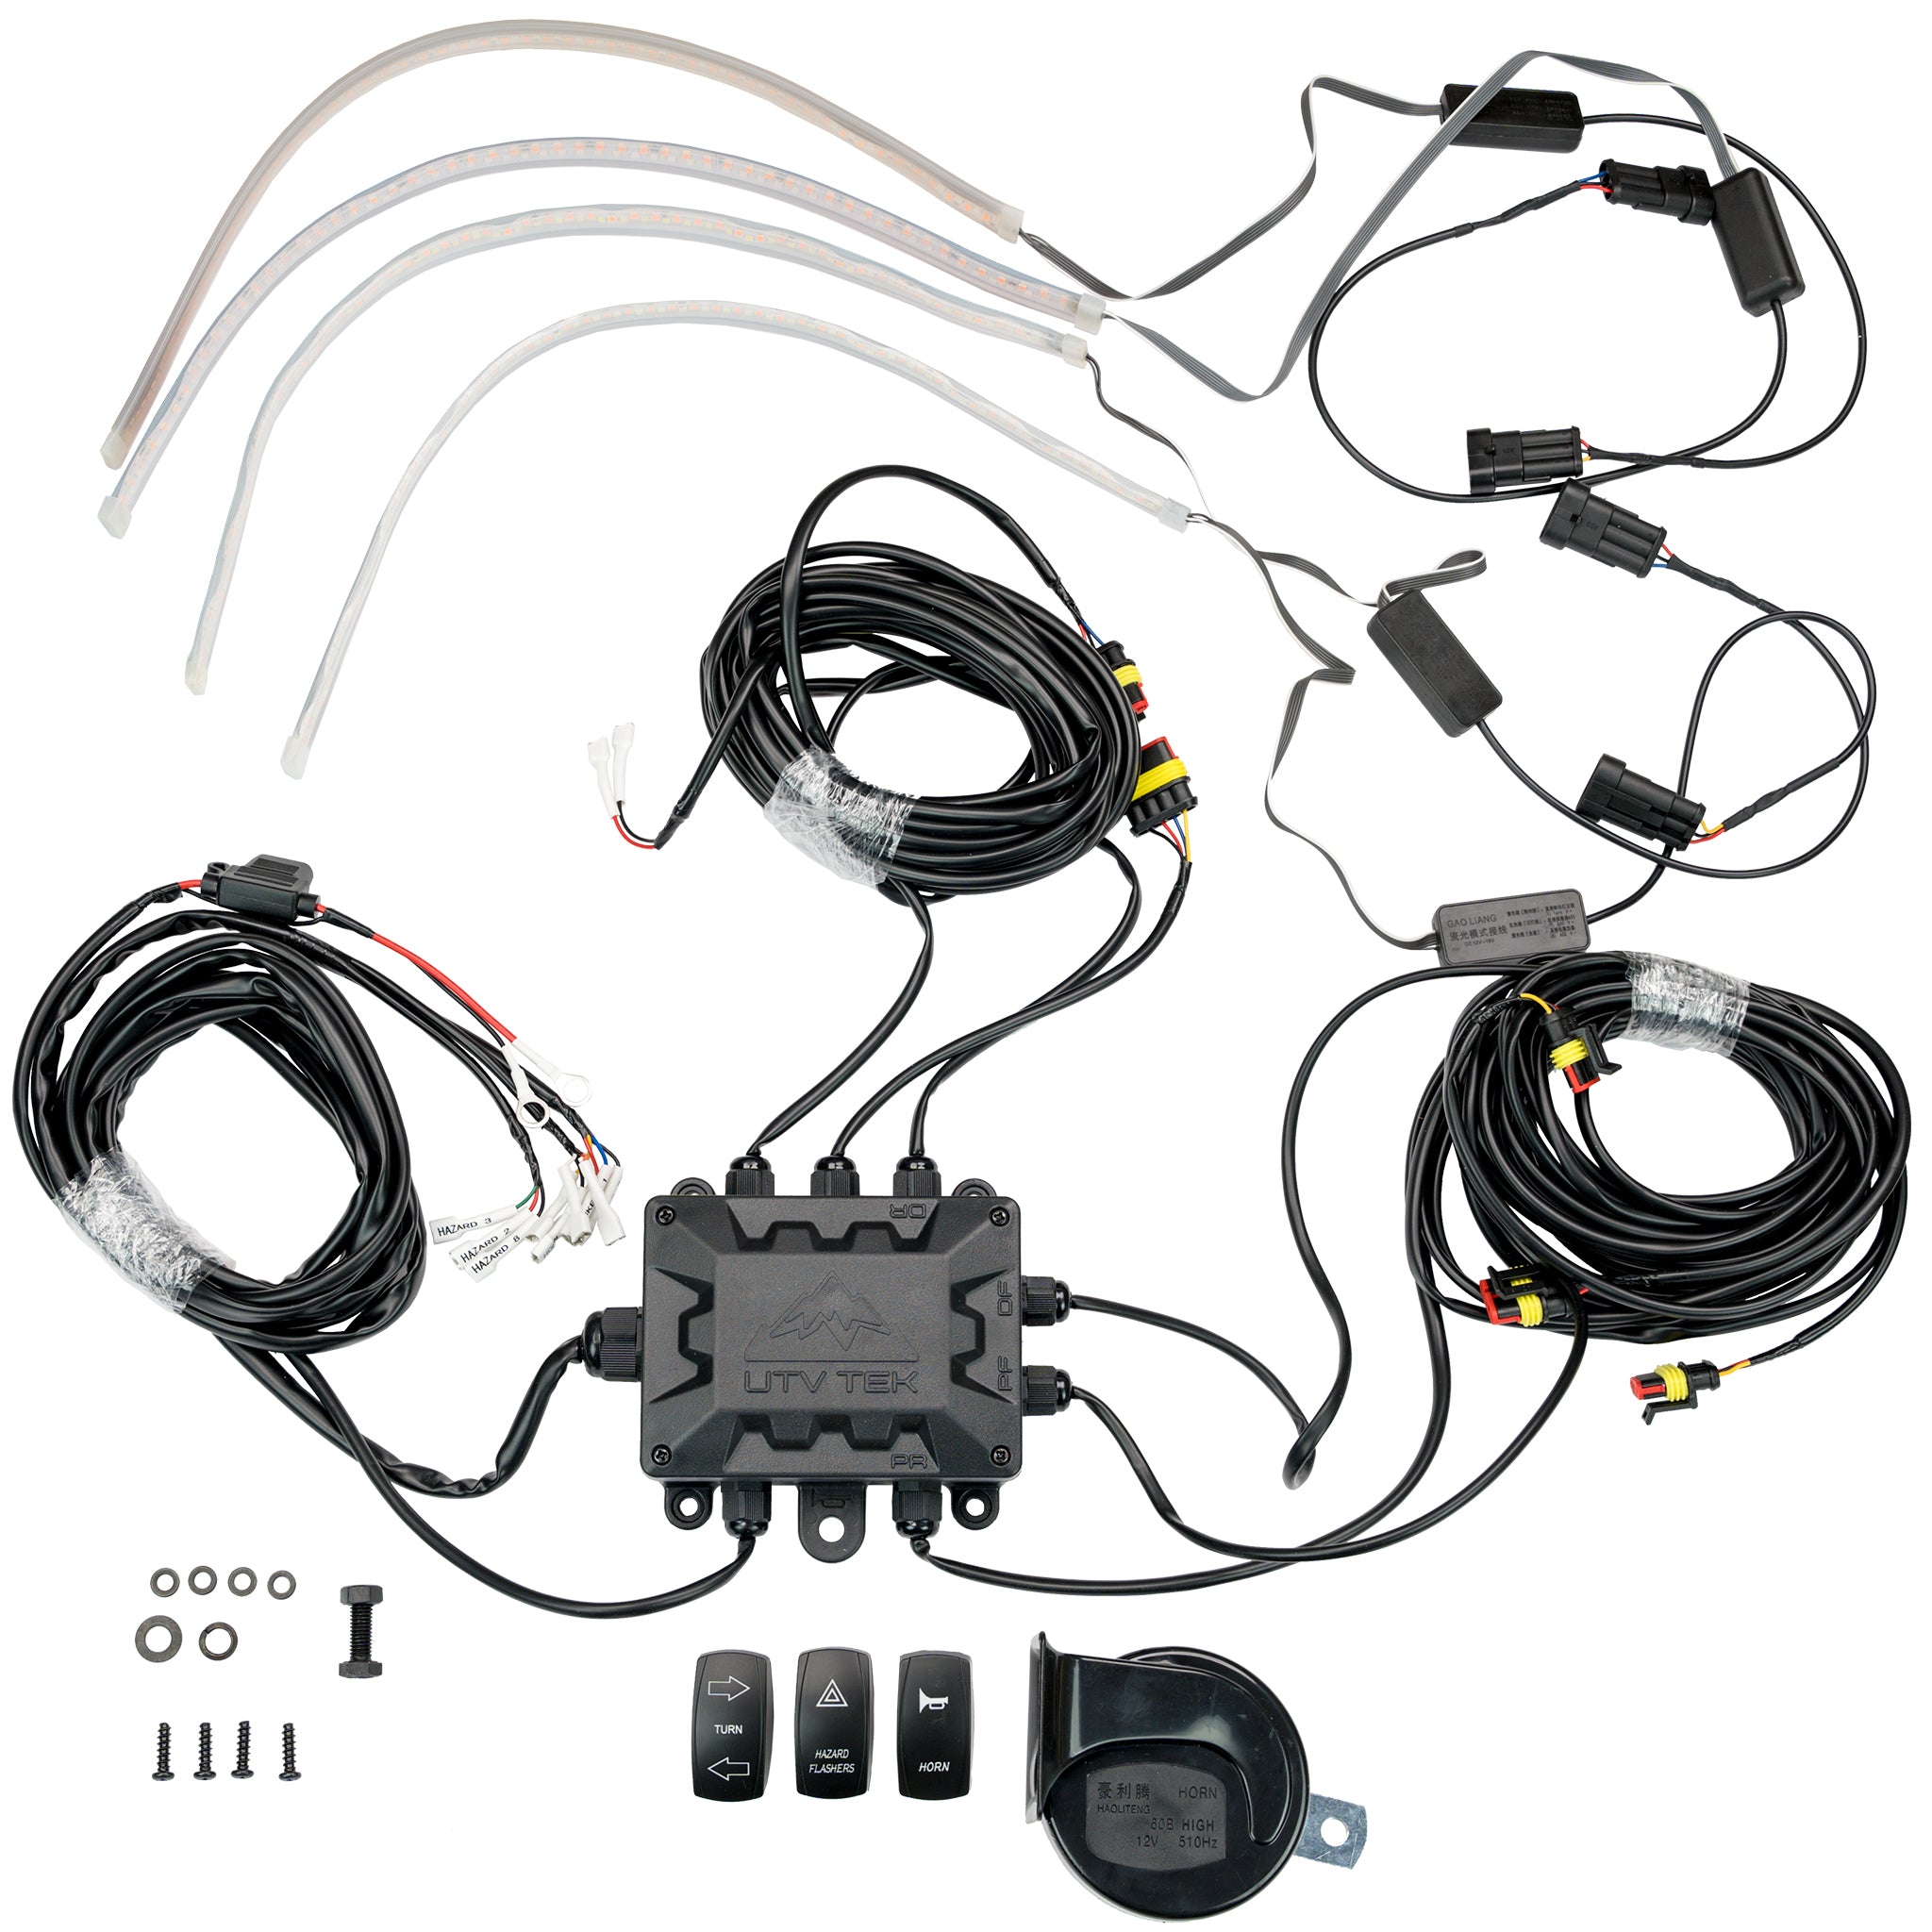 LED Light Harnesses, Switches and Accessories (for Street Legal